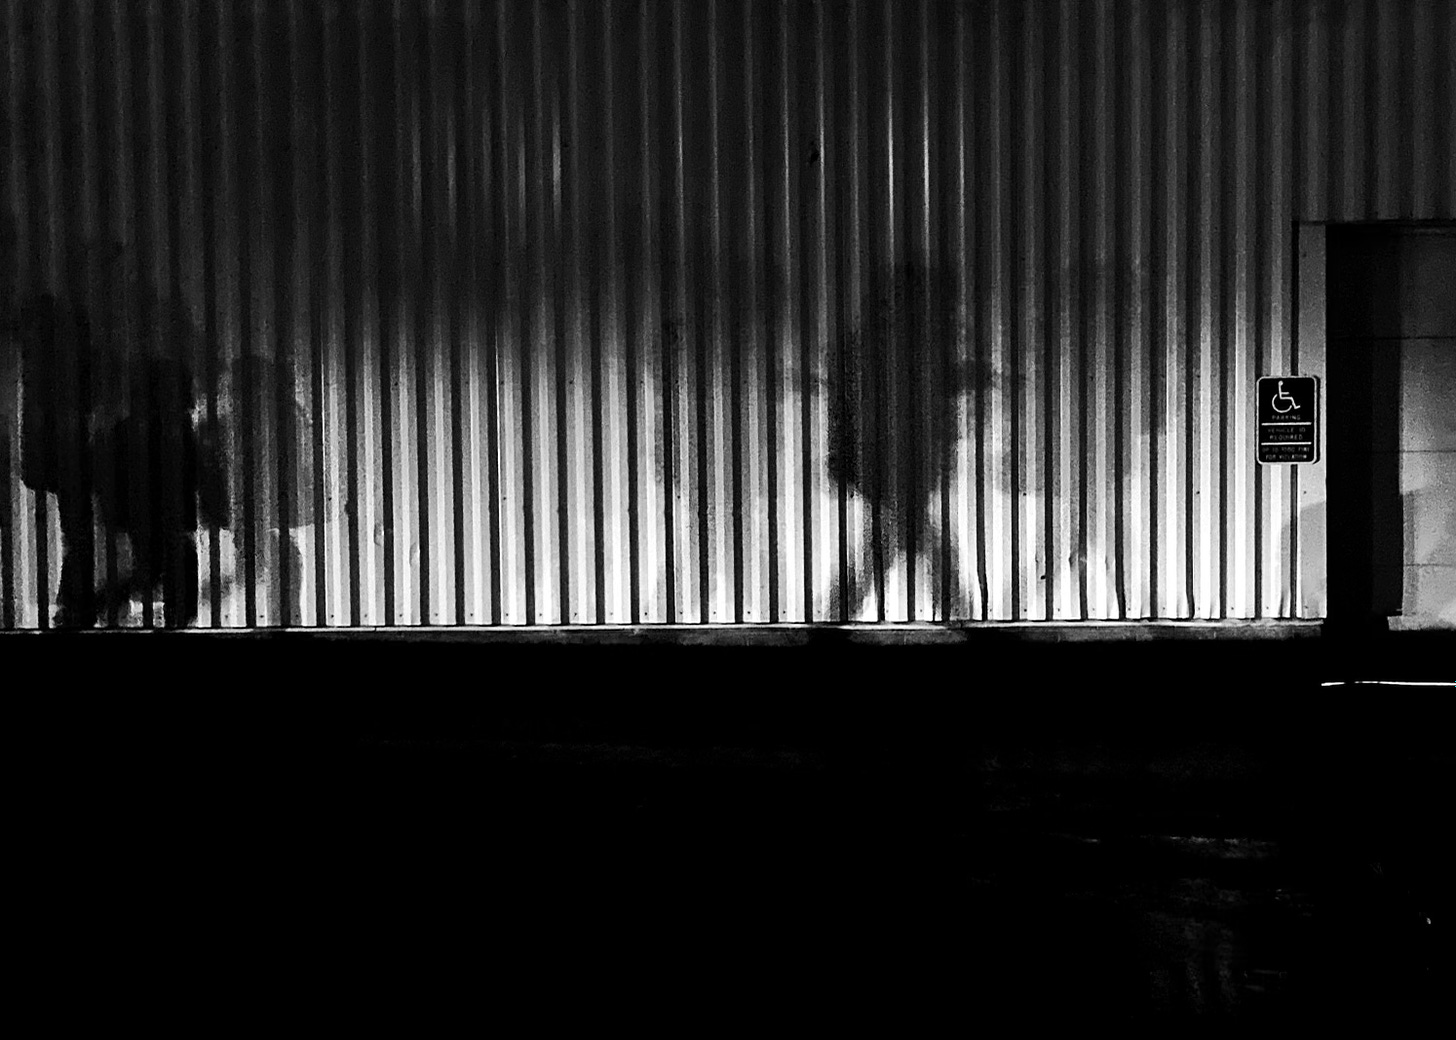 A corrugated metal wall outside of the stadium shows the shadows of the passing people illuminated by car lights.